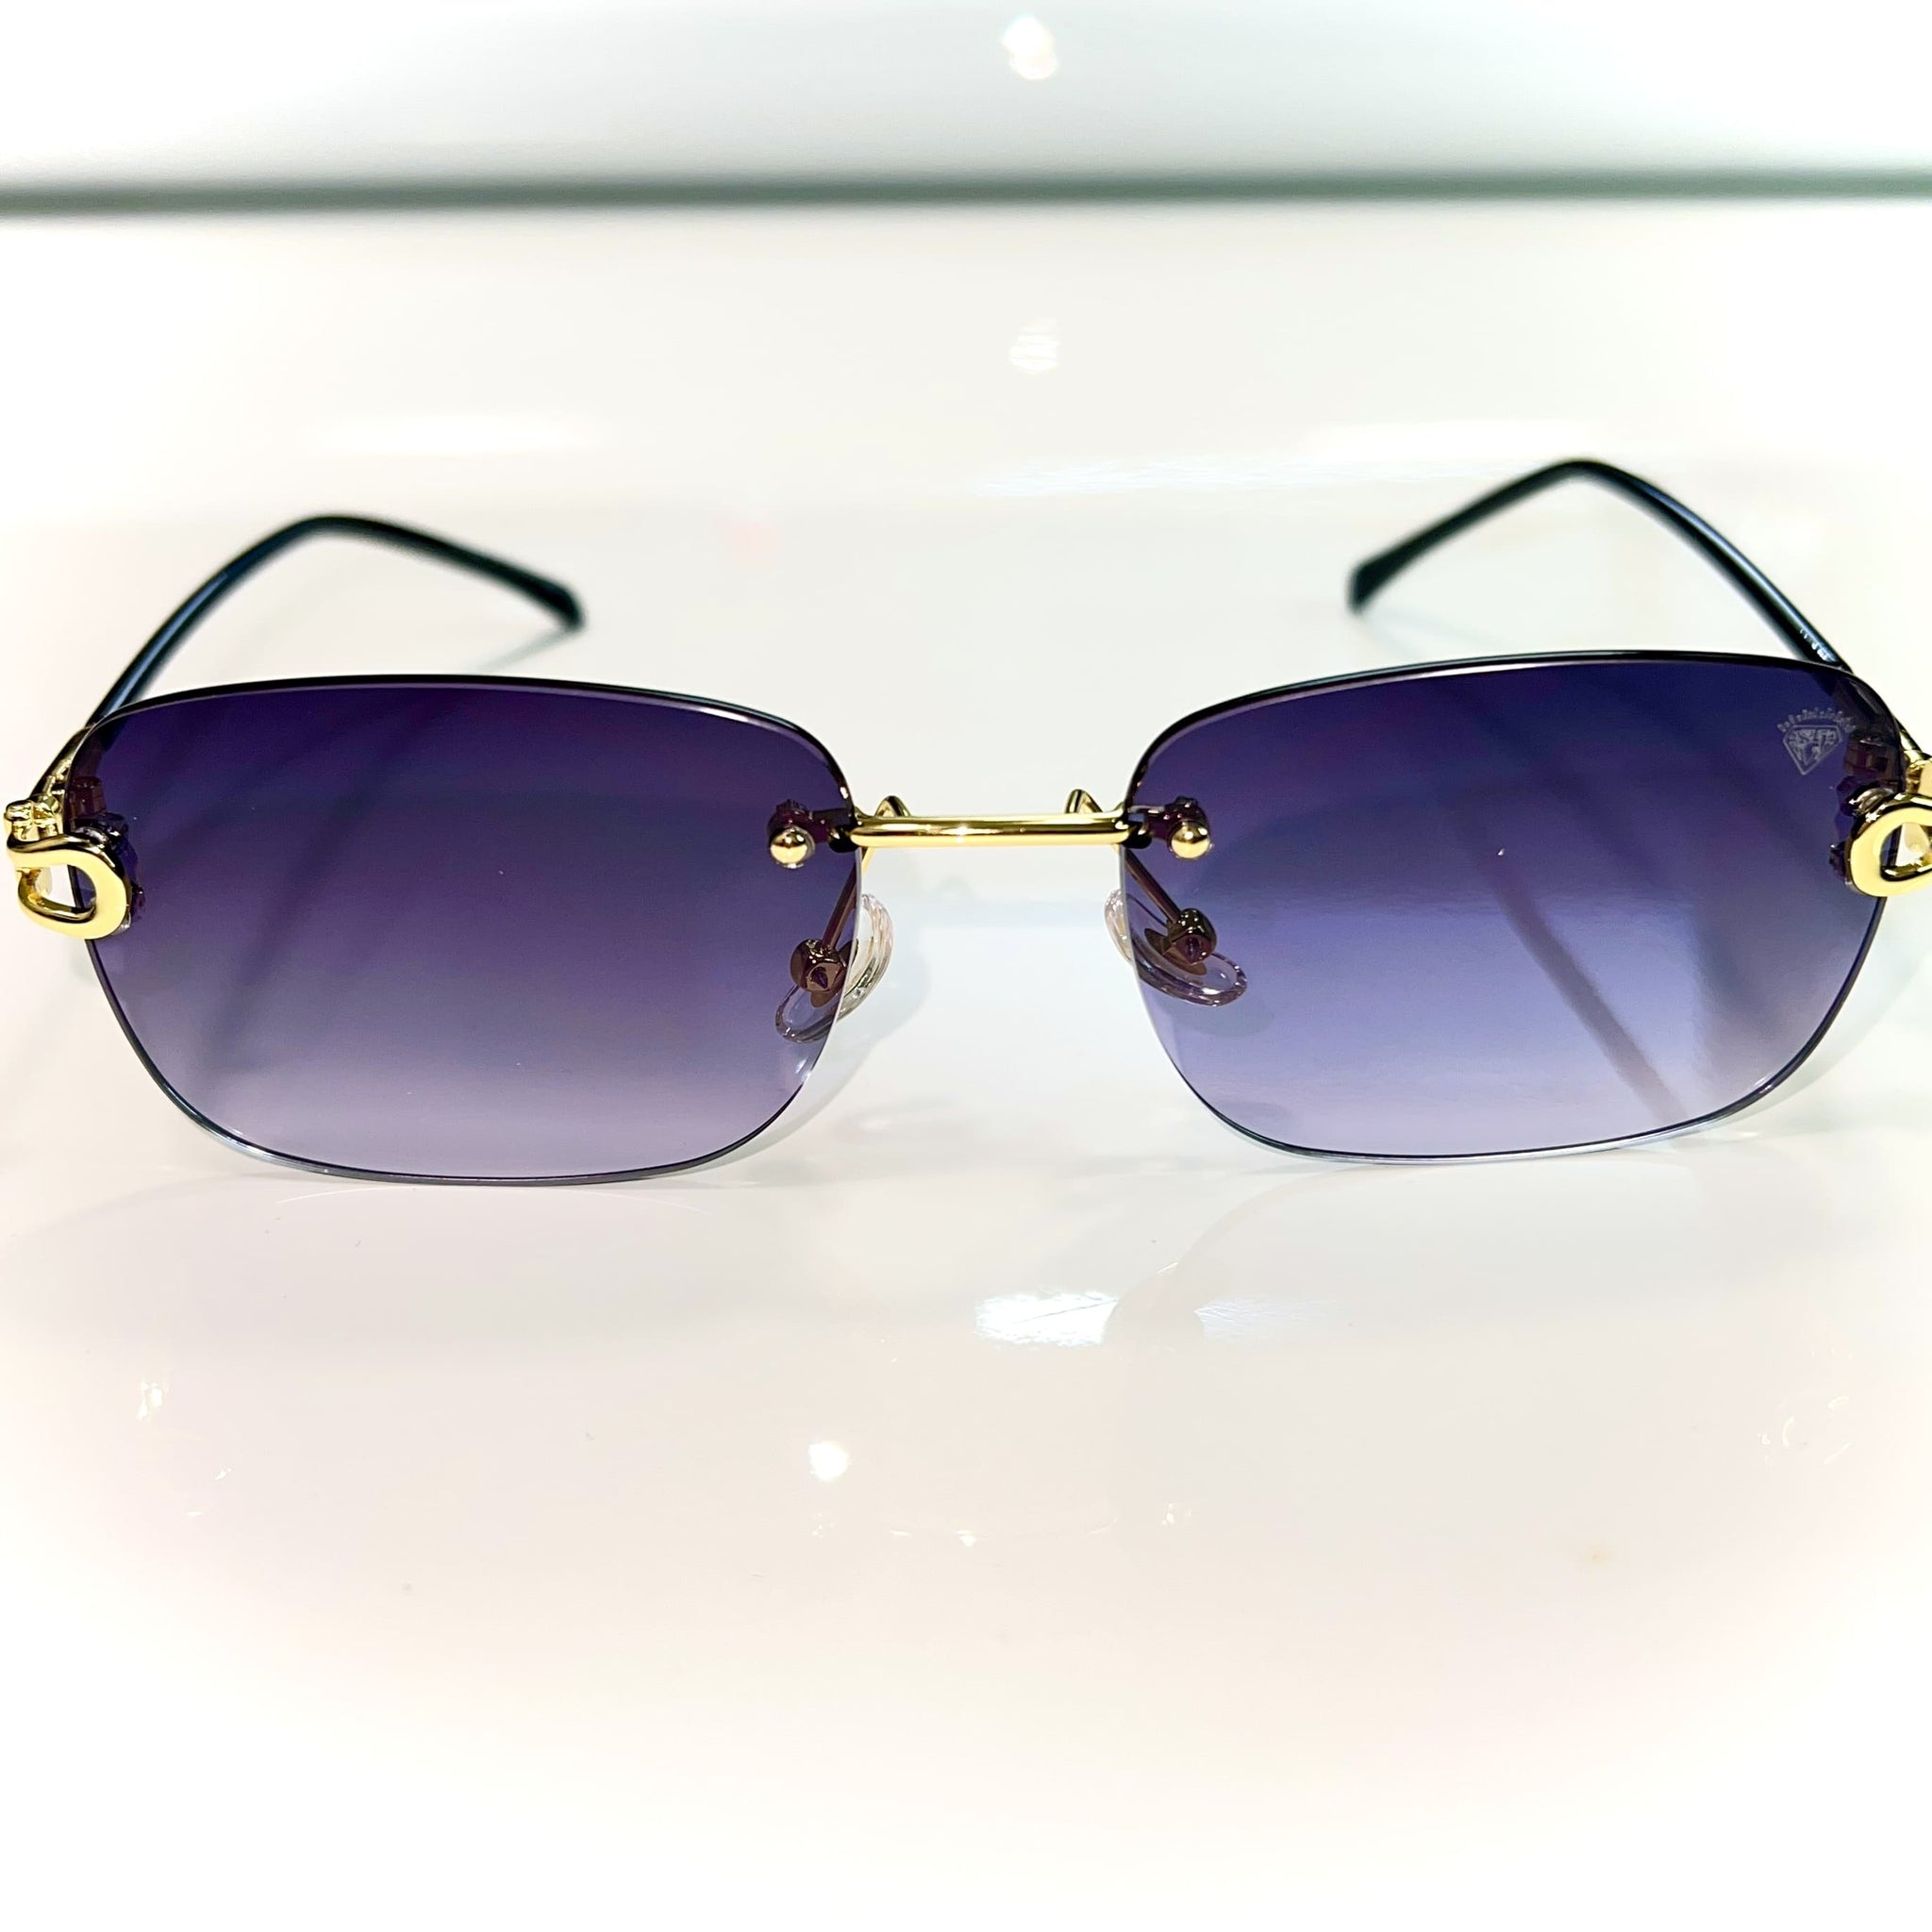 Insane Glasses - Color Changing Shades - 14 carat gold plated / Silicon Side - Sehgal Glasses